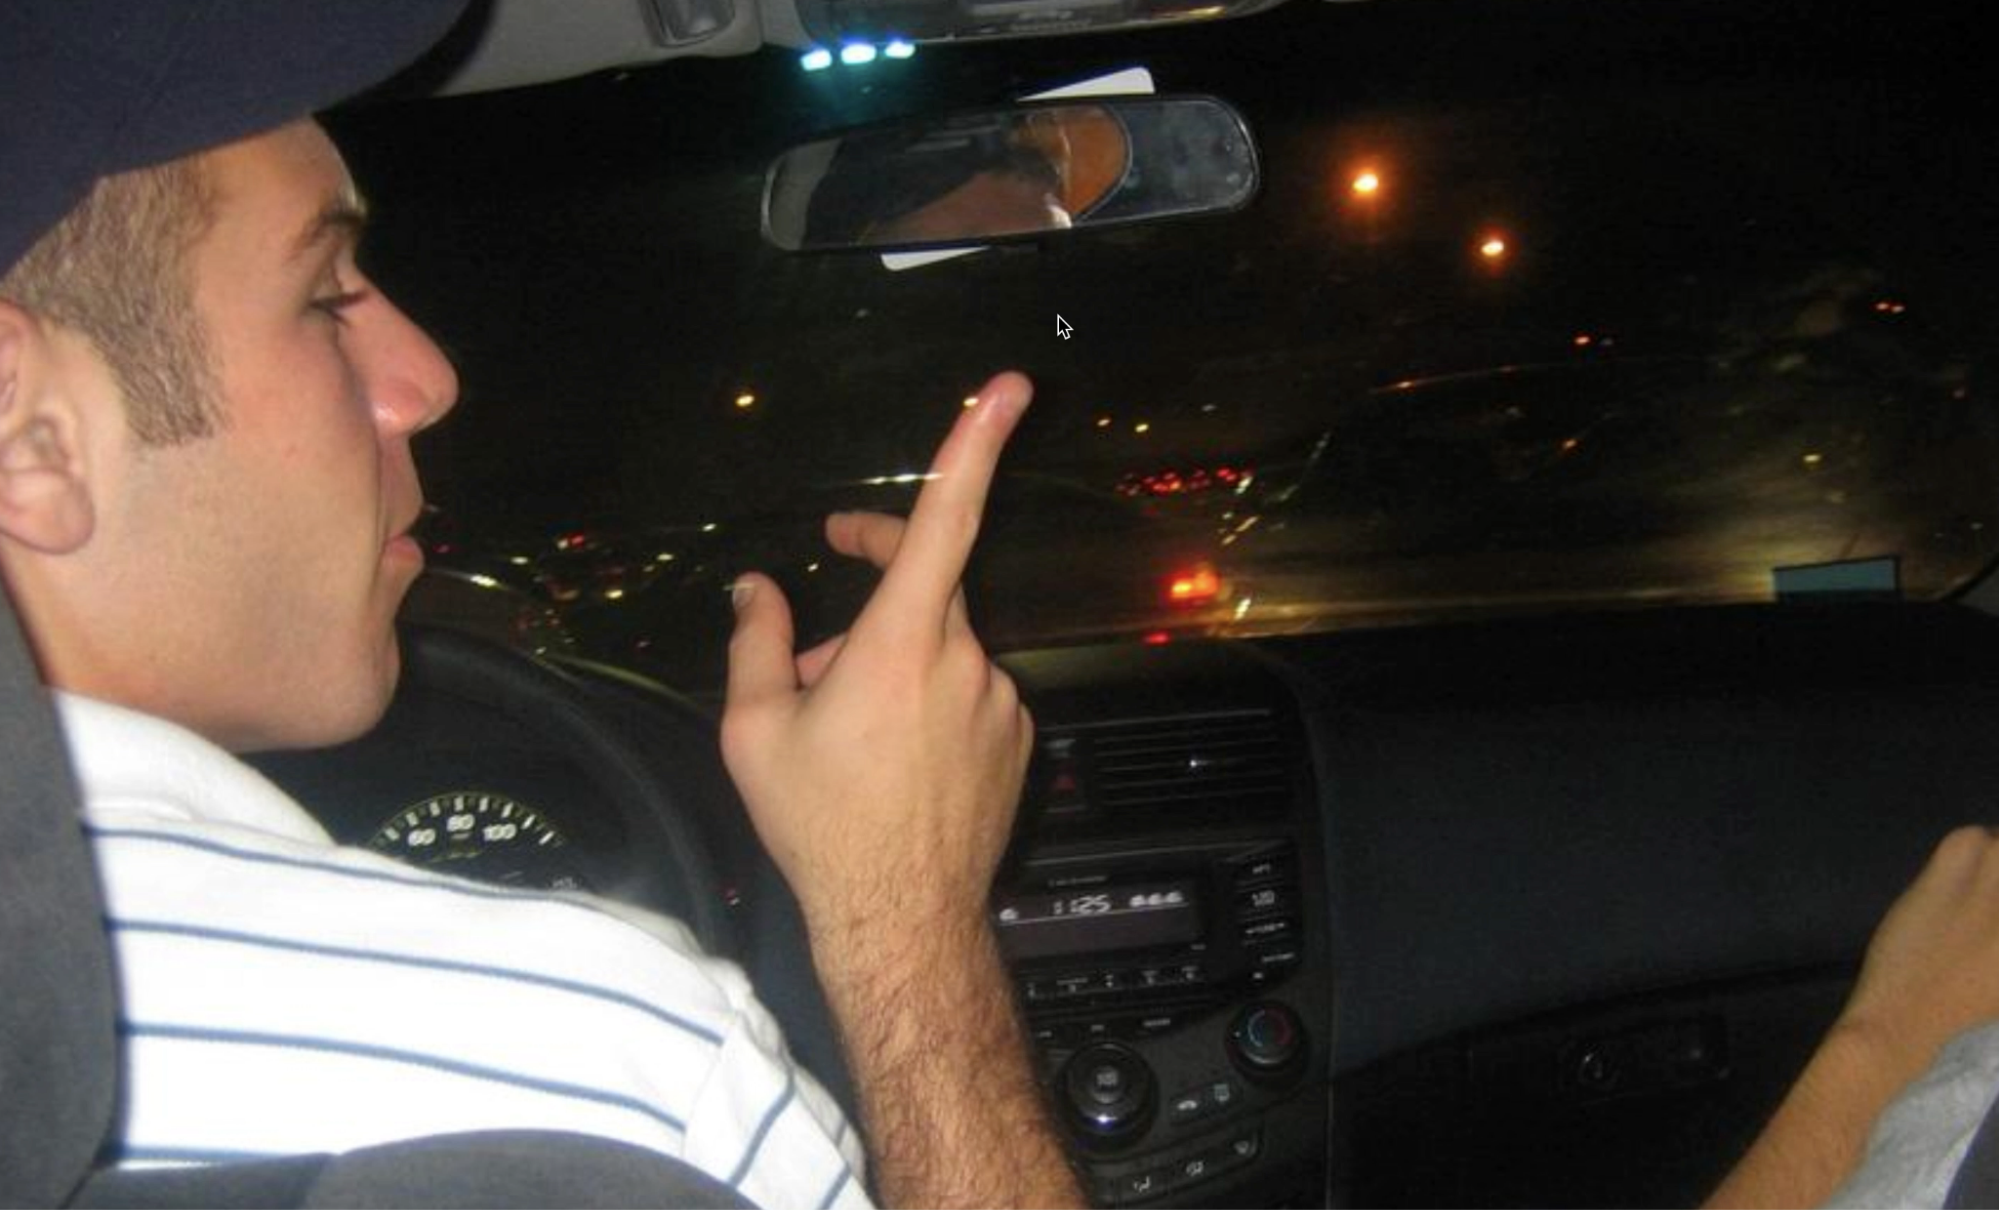 A screenshot from www.pointerpointer.com. In the image, a man in the driver seat of a car points up and to the right. Their index finger is pointing to the location of a mouse cursor.